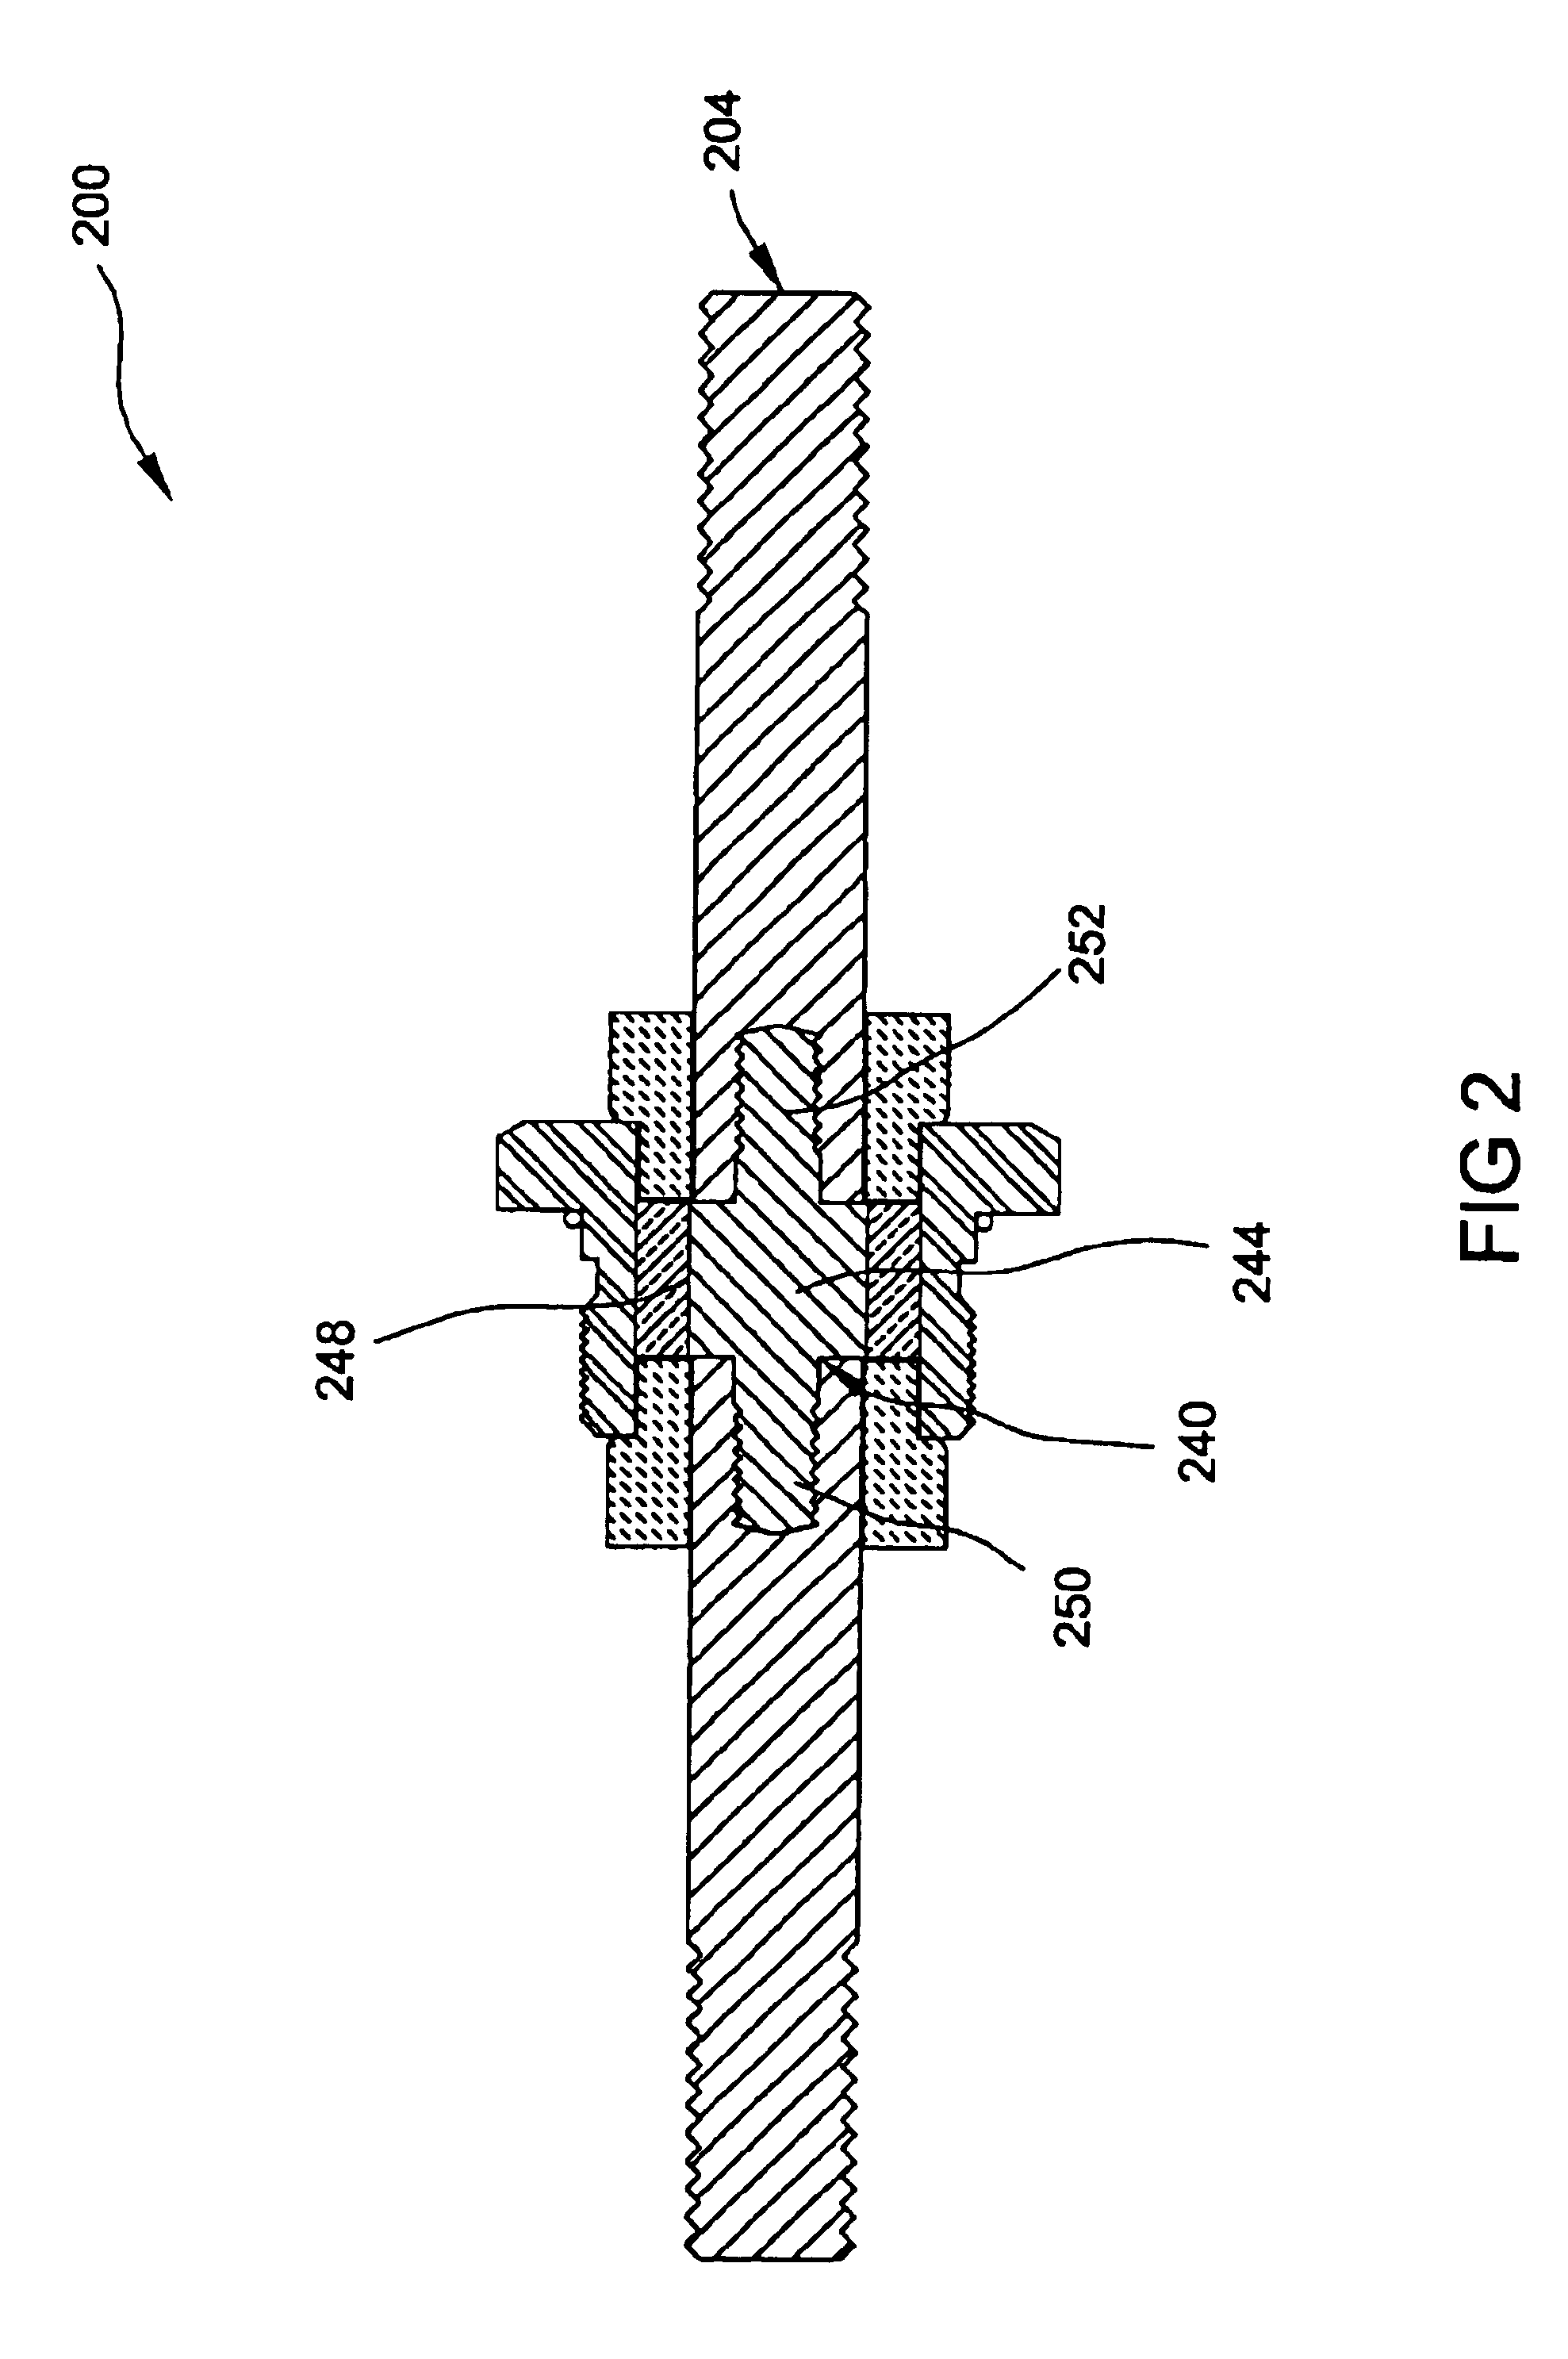 Hermetically sealed current conducting terminal assembly